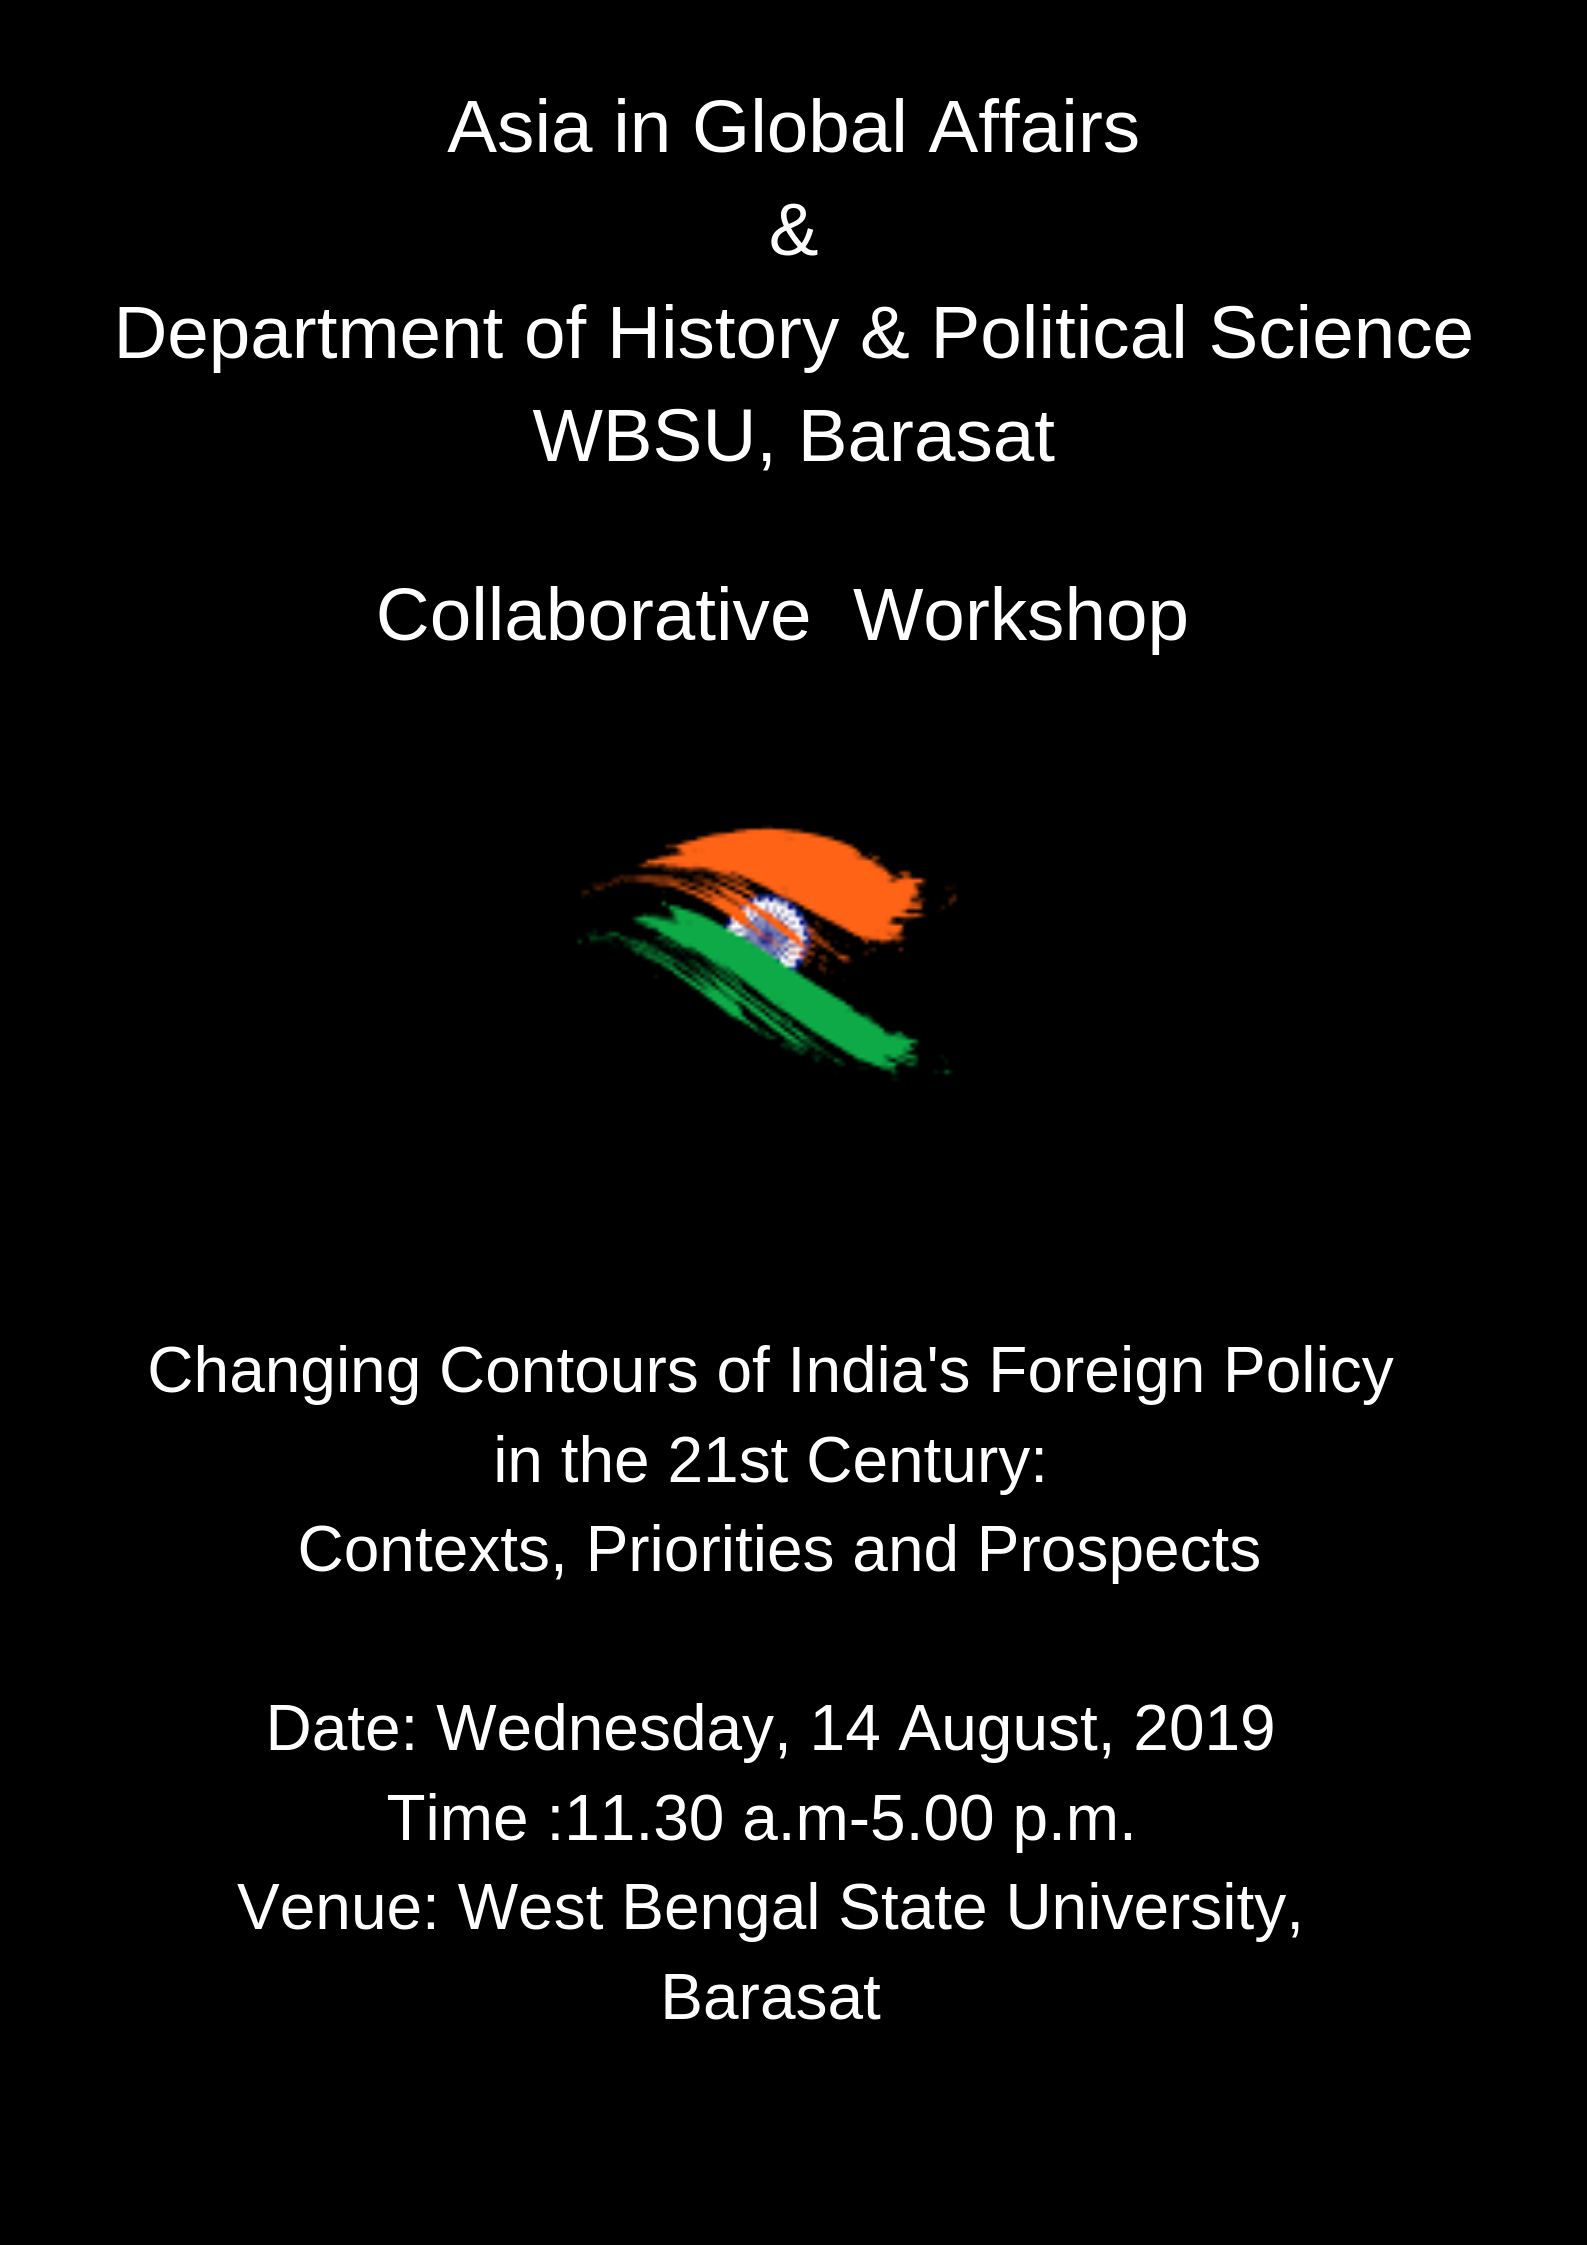 Asia in Global Affairs & West Bengal State University